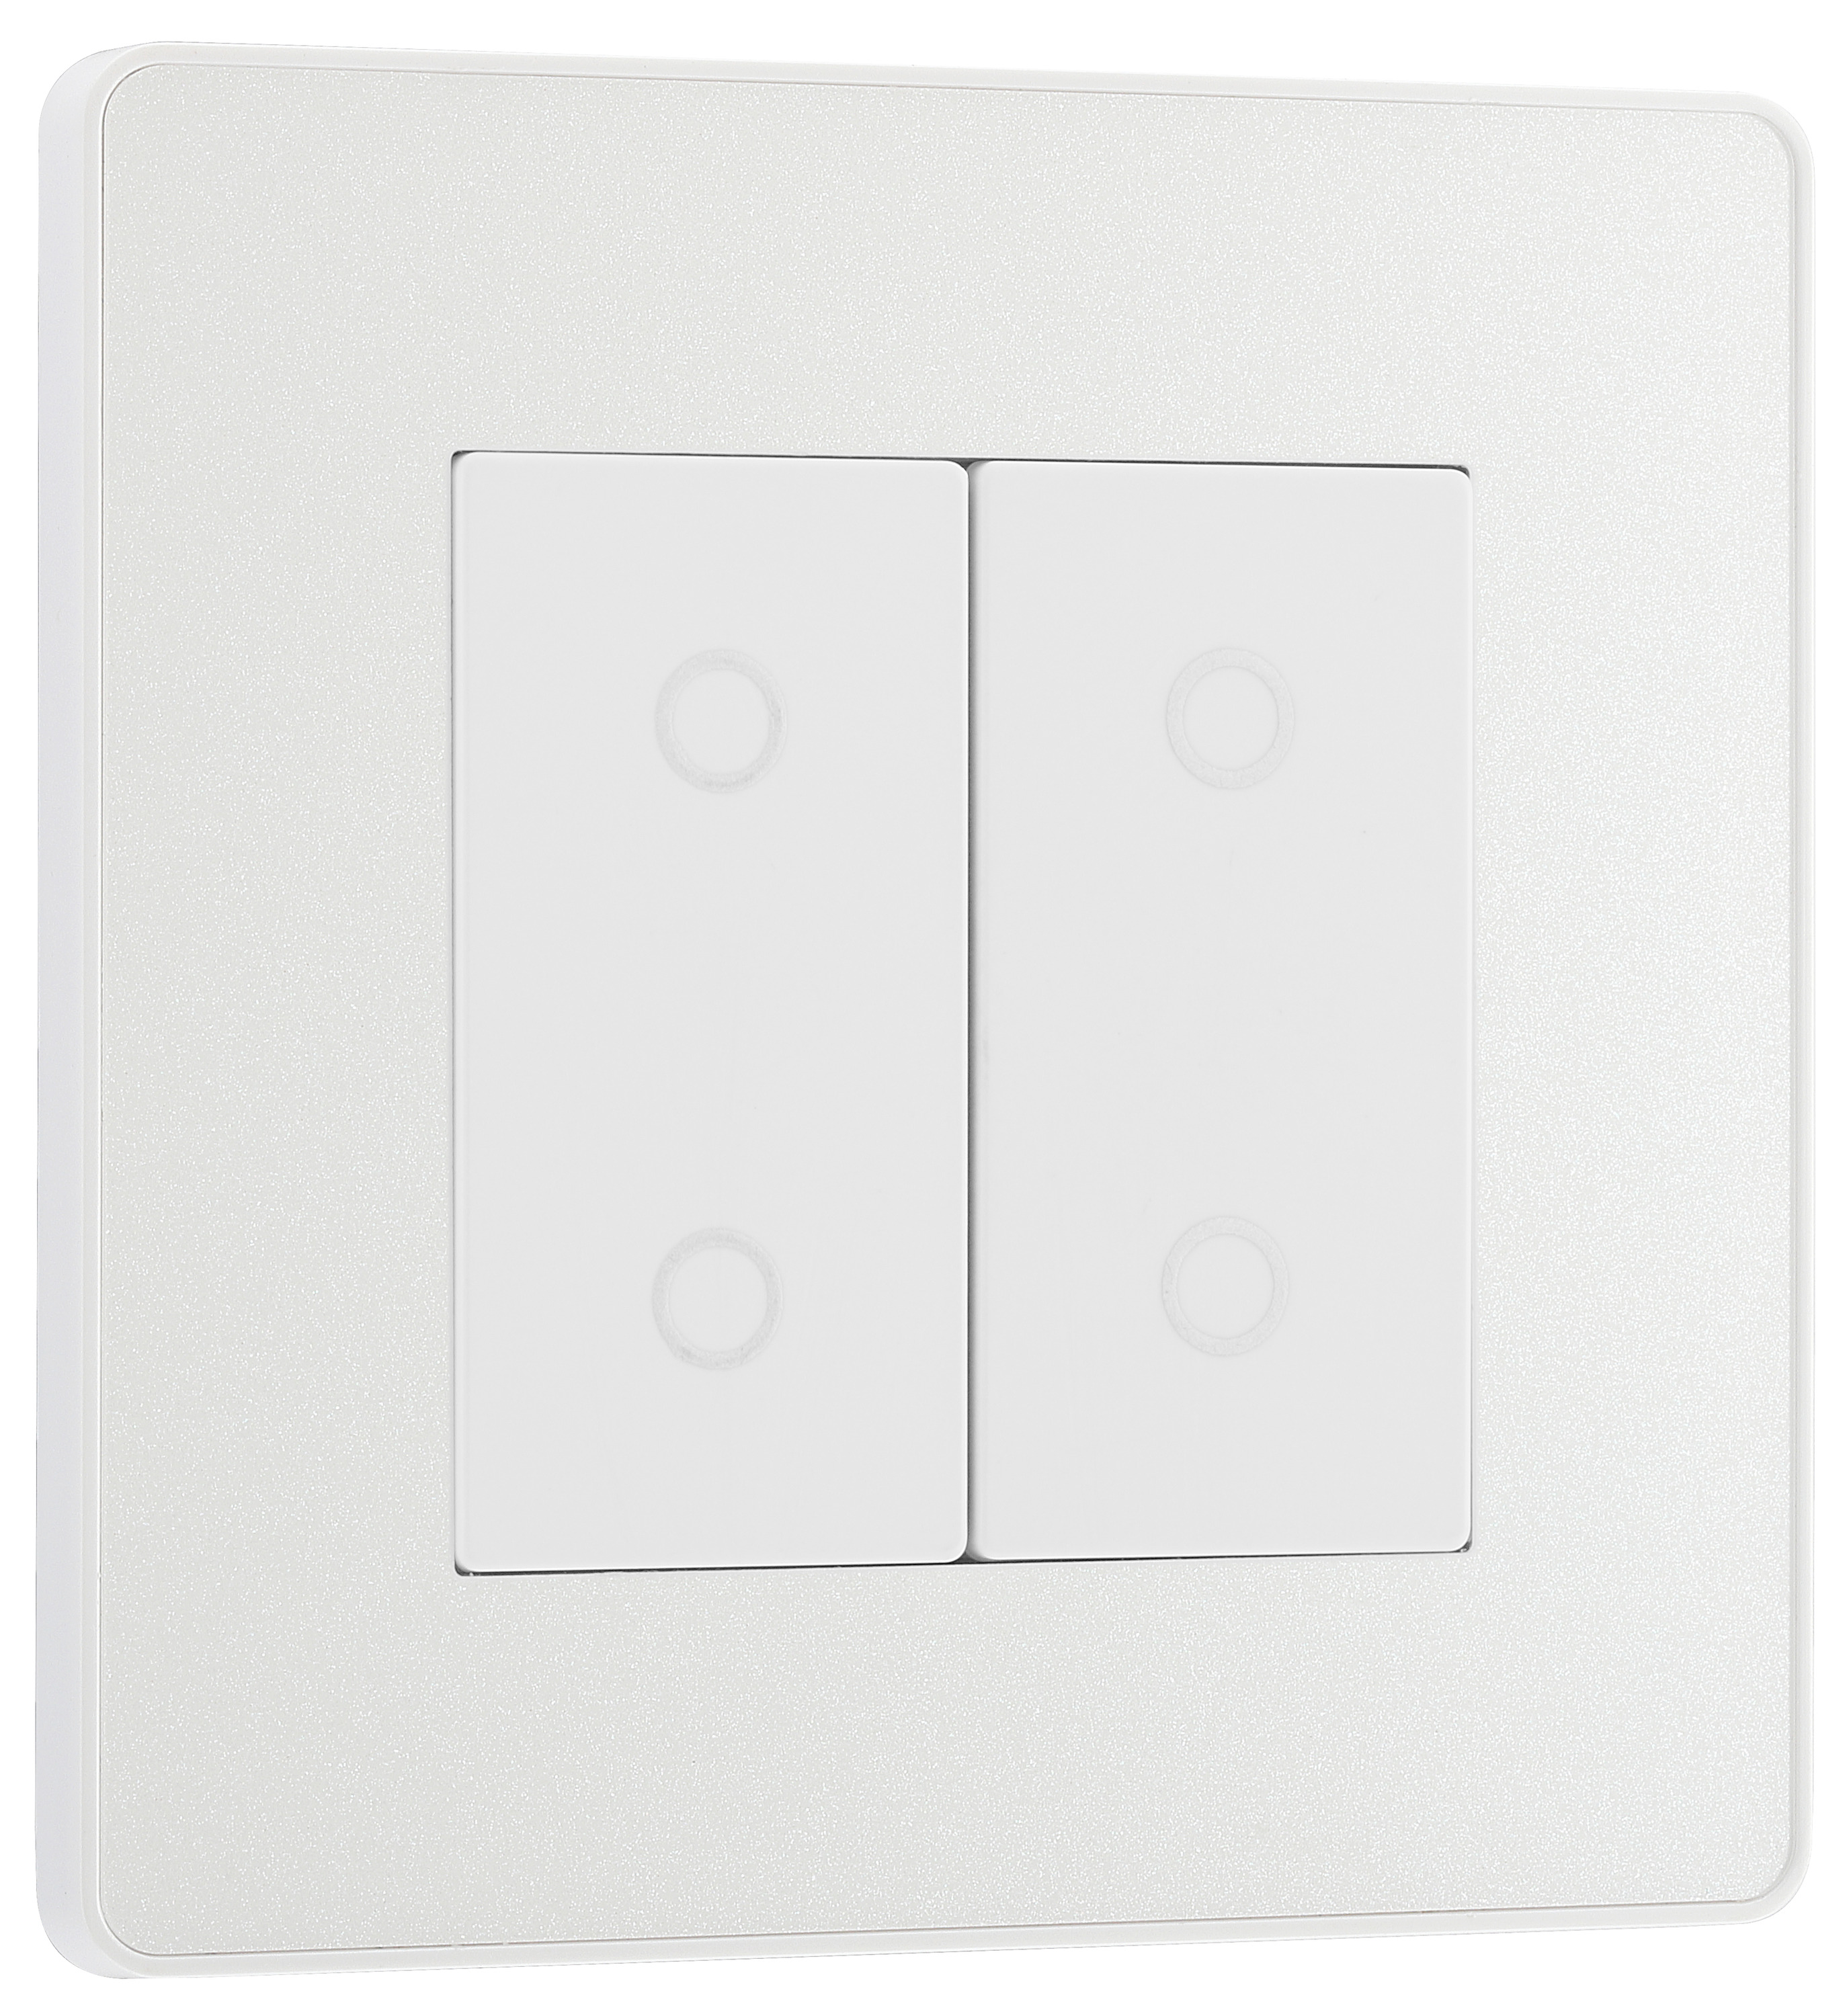 Image of BG Evolve Pearlescent White 2 Way Secondary Double Touch Dimmer Switch - 200W